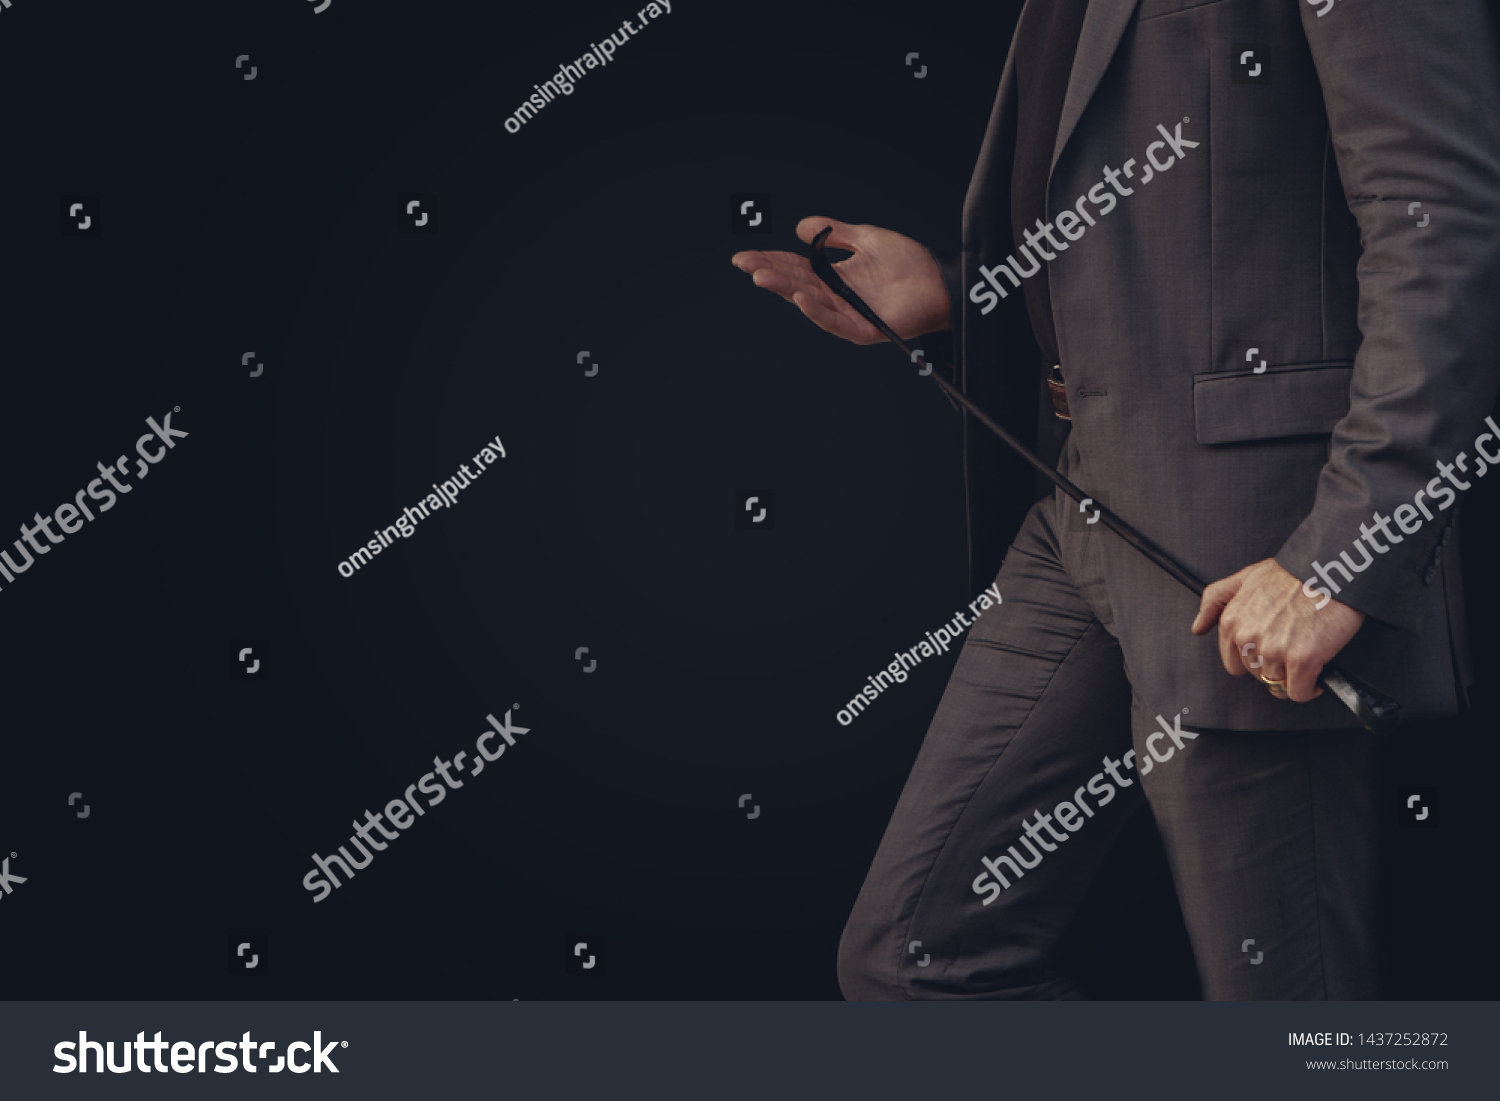 Angry Business Man Horse Whip Stock Photo 1437252872 | Shutterstock